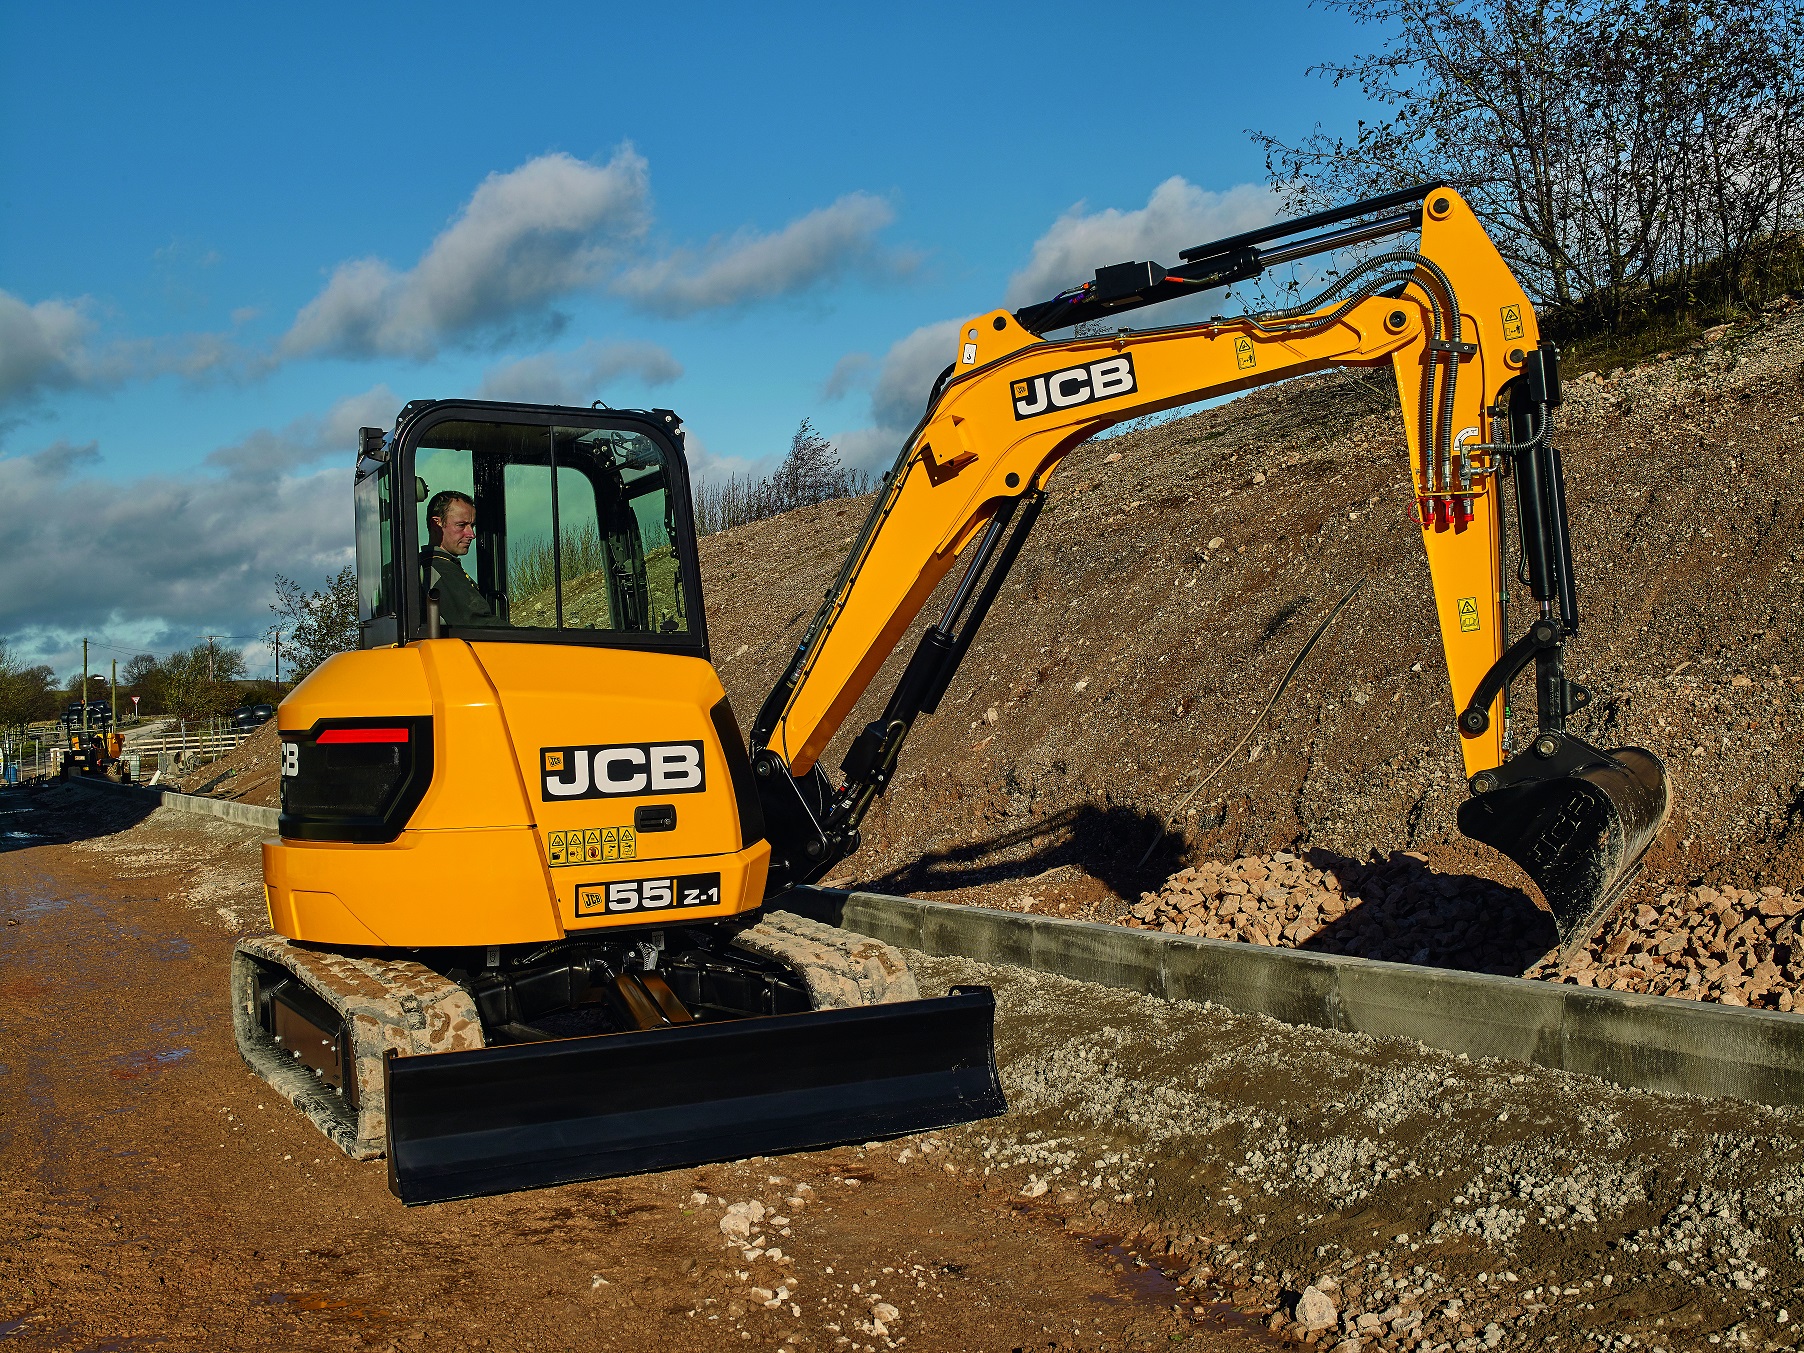 55Z-1 Small Digger, Compact Excavator